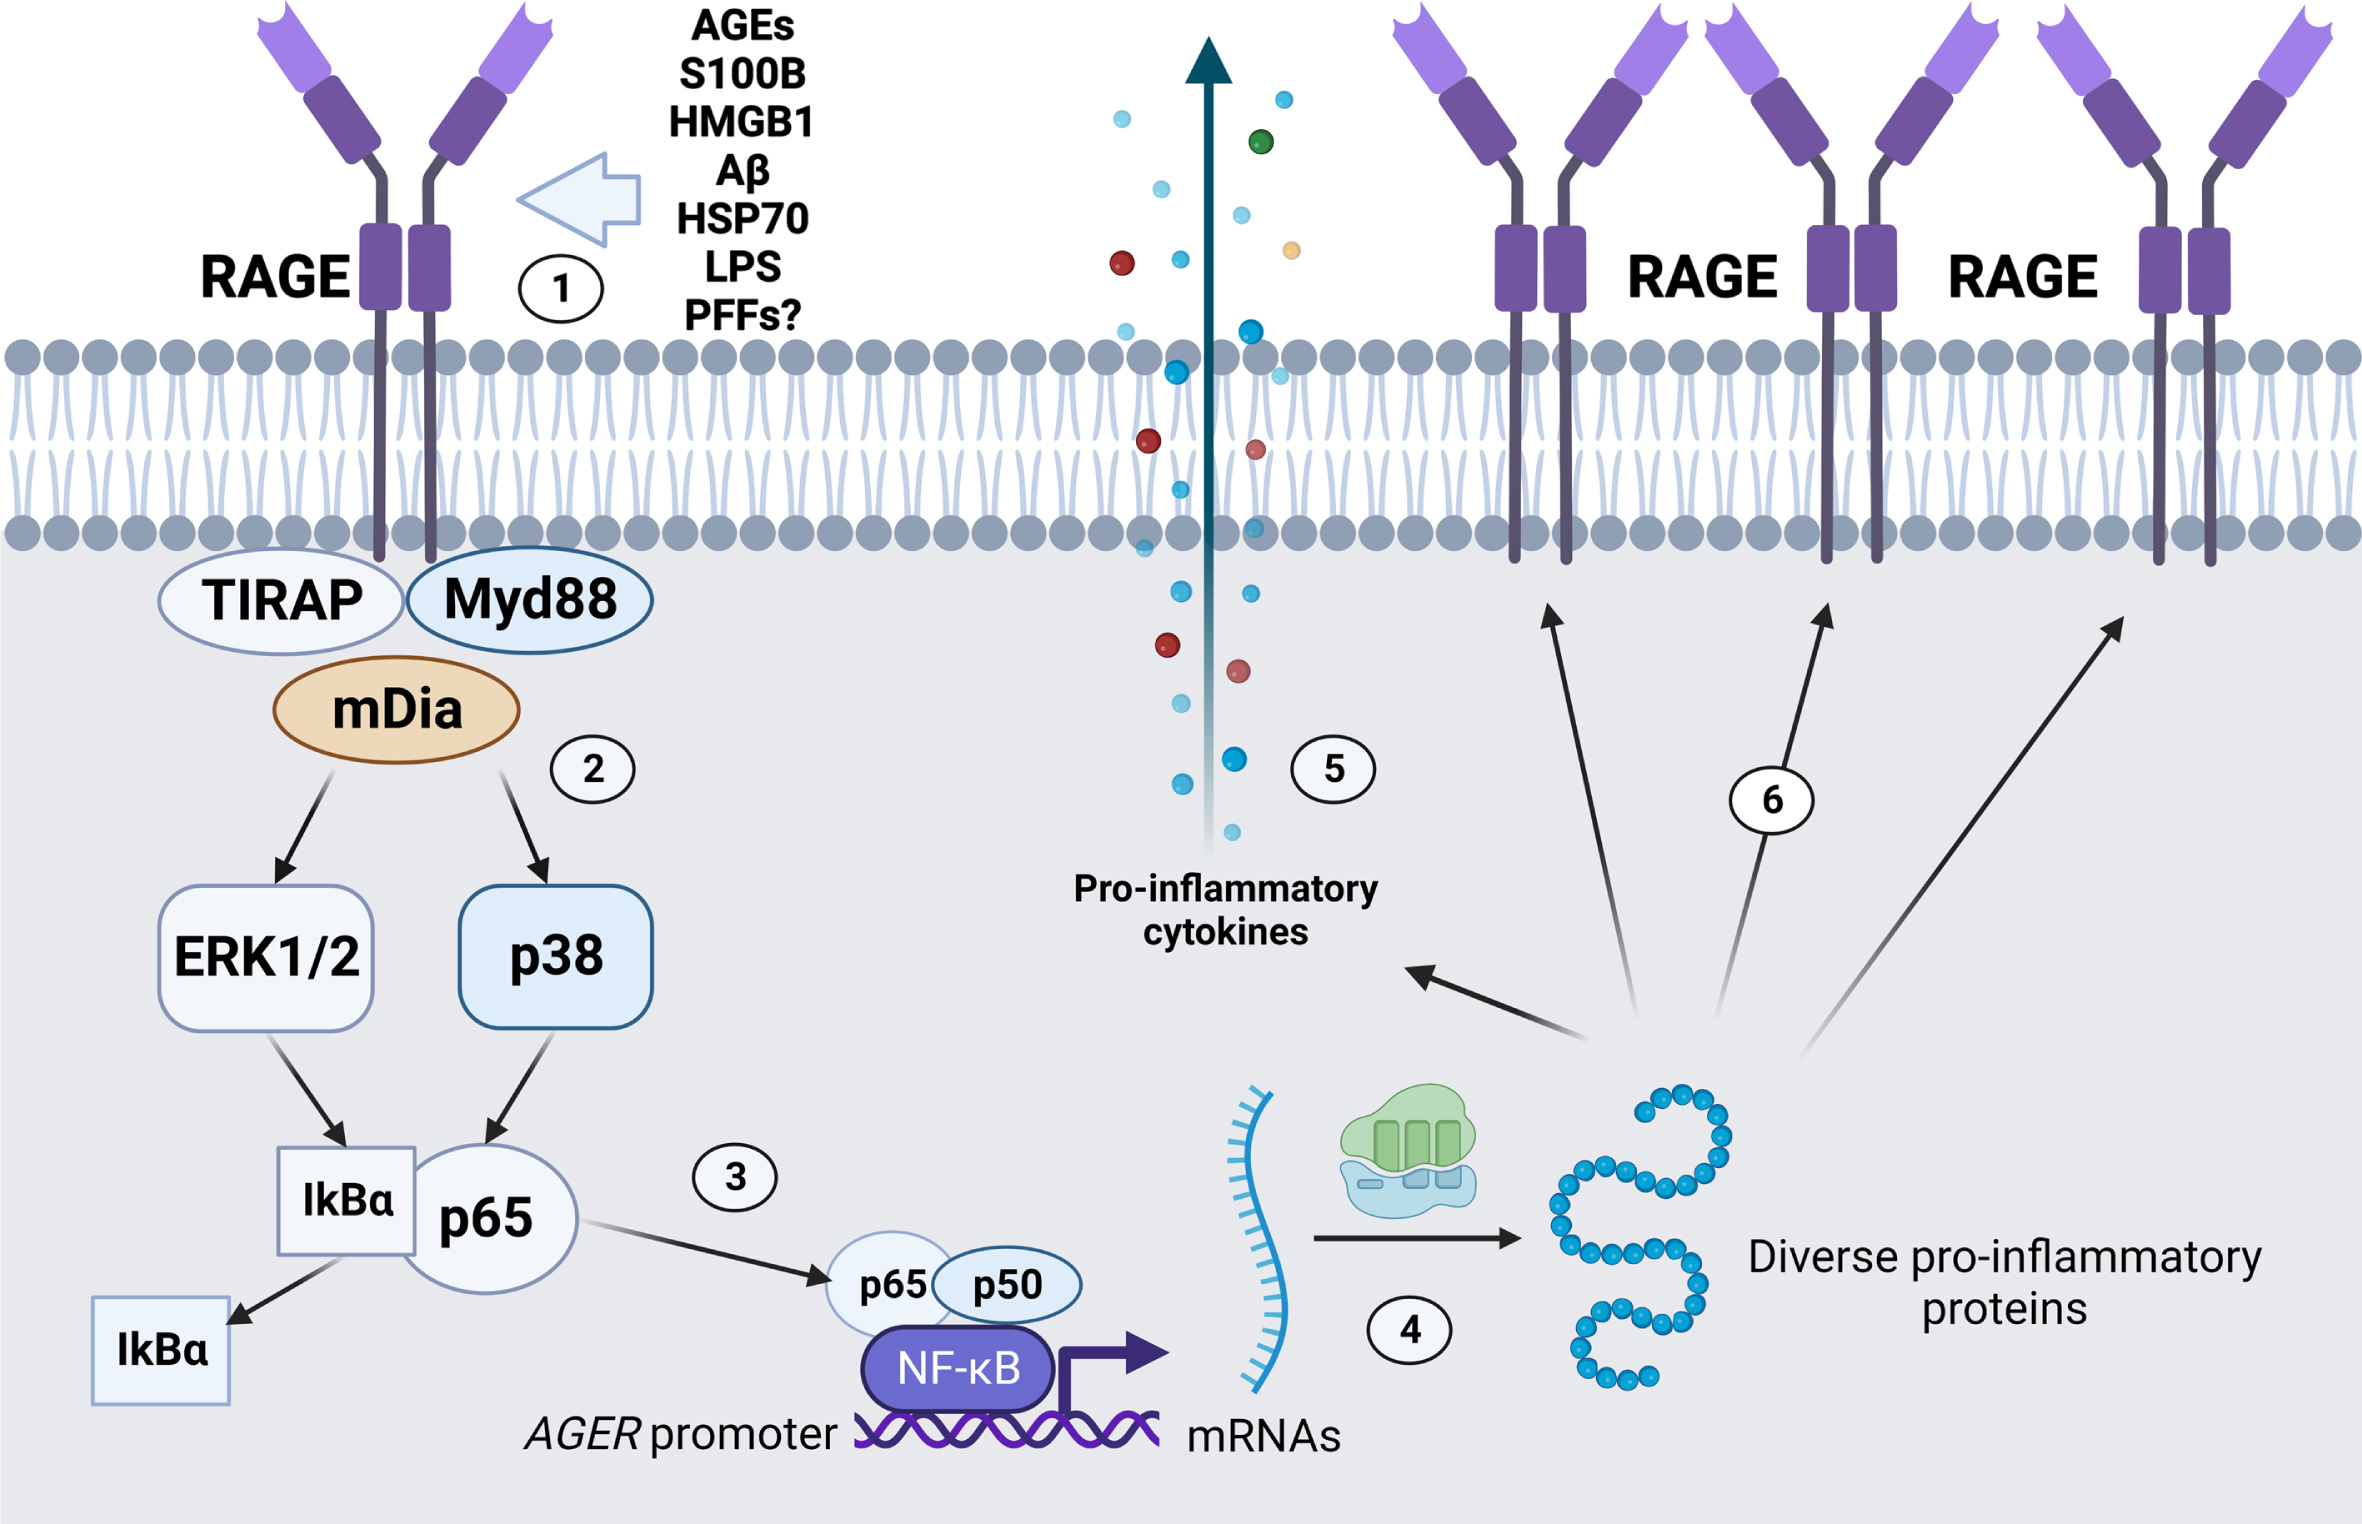 Promotion of pro-inflammatory gene transcripion and RAGE positive feedback expression by RAGE activation. (1) Diverse RAGE ligands, such as AGEs, S100B, HMGB1, Aβ, HSP70, LPS, and α-synuclein PFFs, among other ligands, bind to RAGE in the extracellular space. (2) RAGE activation is mediated by intracellular proteins such as the TIRAP-Myd88 system, and/or mDia cytoskeleton component, leading to different effects such as NADPH oxidase activation (not shown) and ERK1/2 and p38 activation. (3) ERK1/2 and p38 activation can promote the dissociation of the NF-kB subunit p65 from the inhibitory partner IkBα, leading to nuclear translocation and activation of NF-kB promoter activity. (4) Transcription of diverse pro-inflammatory genes is activated, such as (5) pro-inflammatory cytokines for cell release and (6) additional copies of RAGE. Image created with BioRender.com.